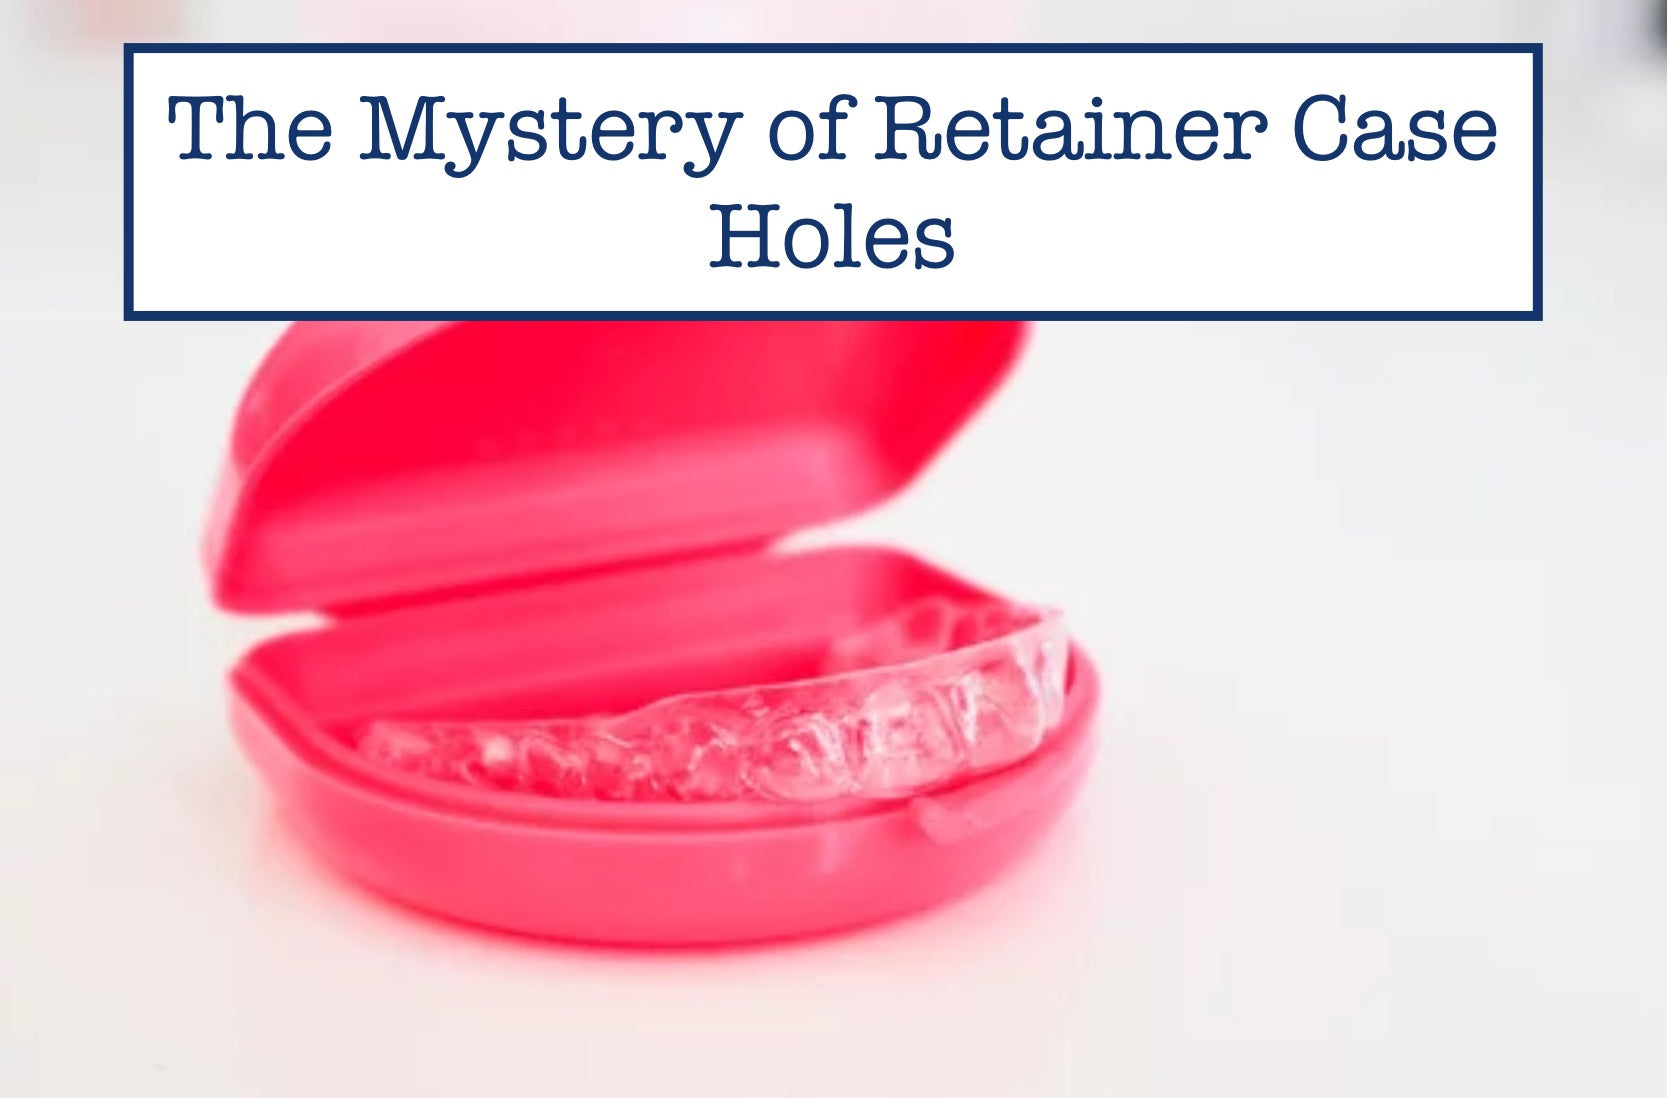 The Mystery of Retainer Case Holes